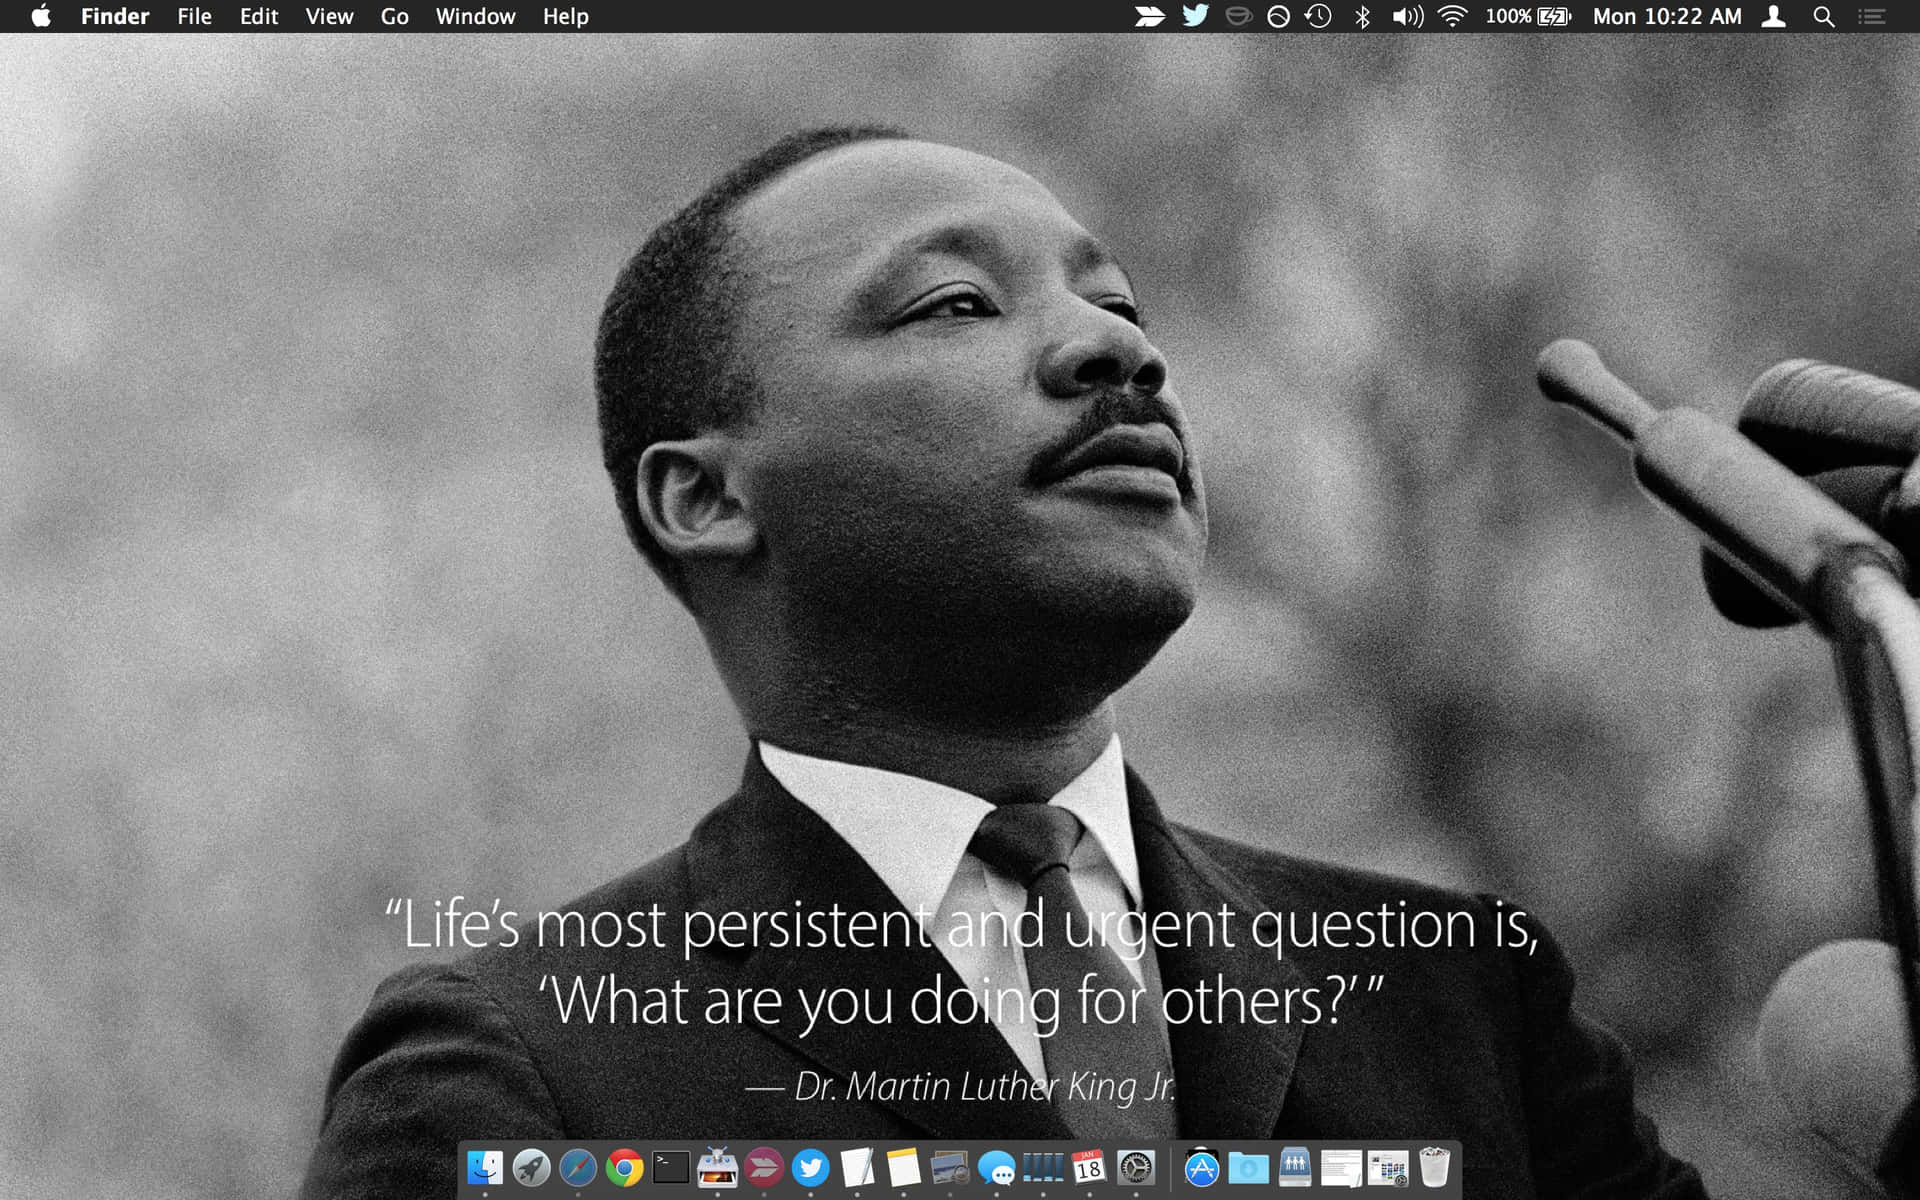 "Inspire yourself with motivation and determination to reach your greatest potential." Wallpaper